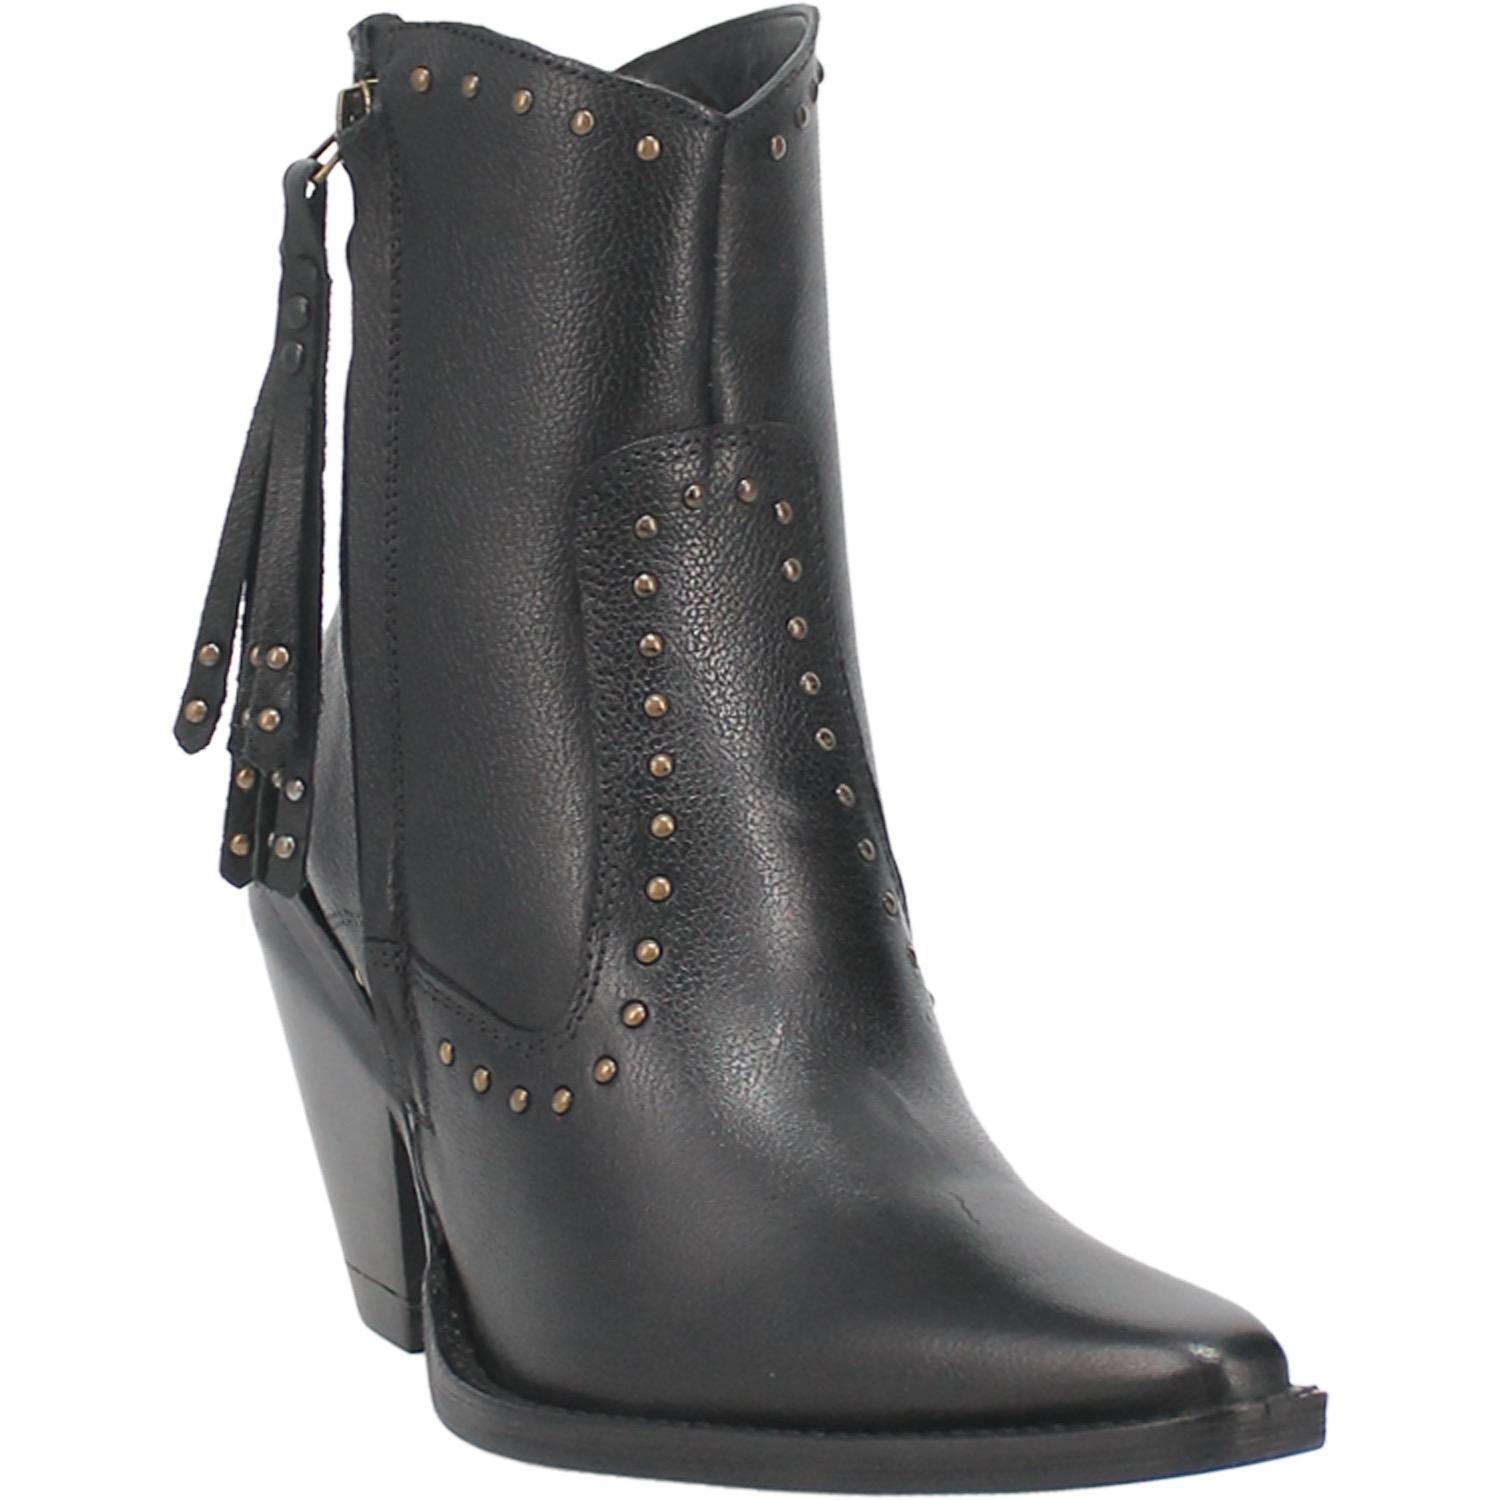 Classy N' Sassy Studded Black Leather Booties (DS)